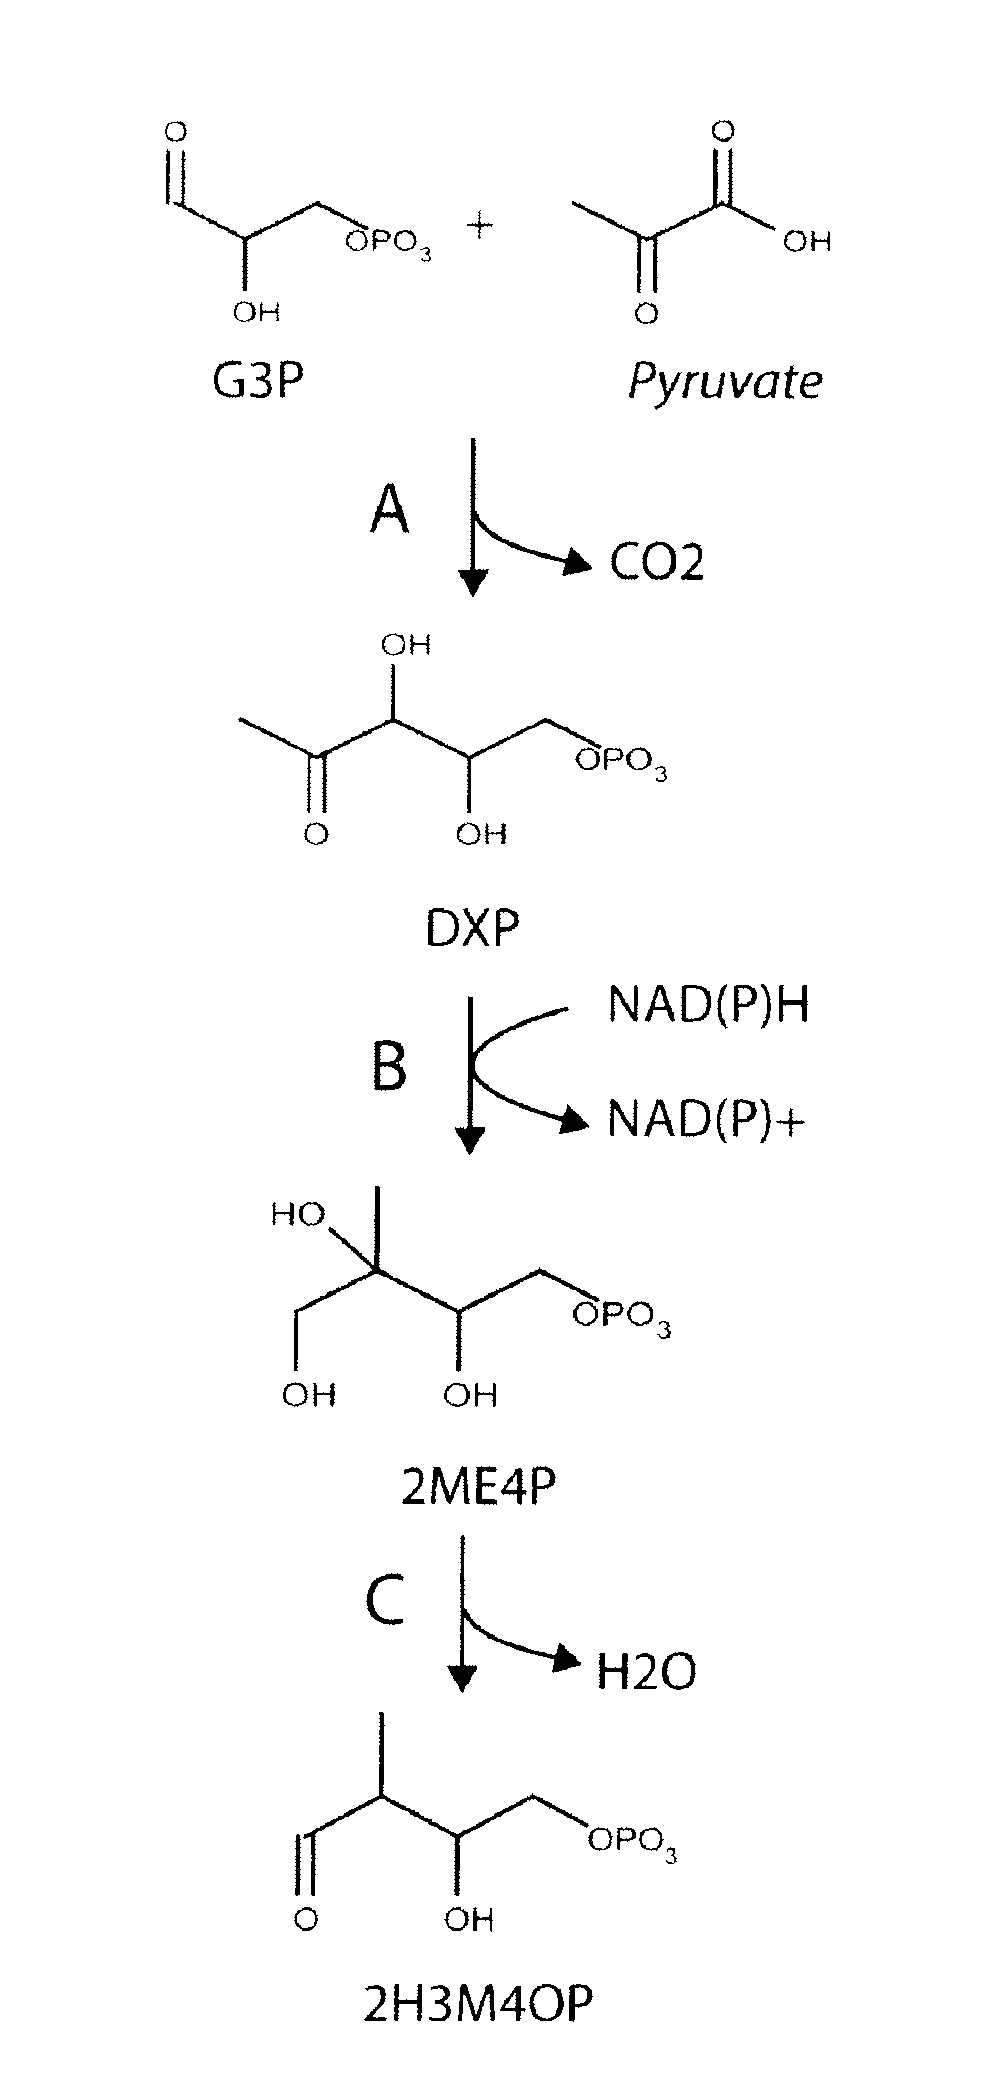 Microorganisms and methods for the biosynthesis of p-toluate and terephthalate